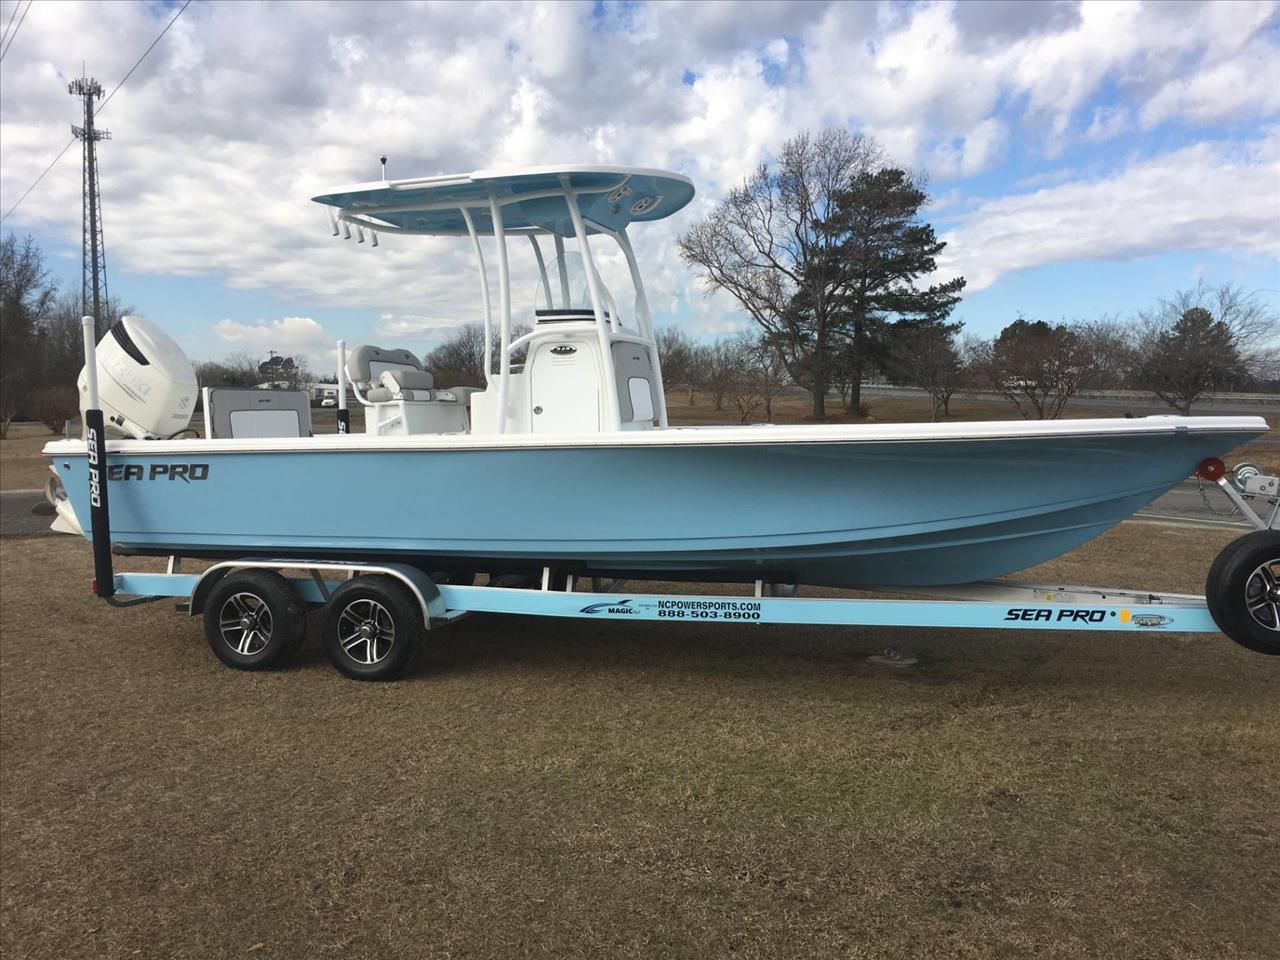 Sea Pro 248 2017 for sale for 68,450